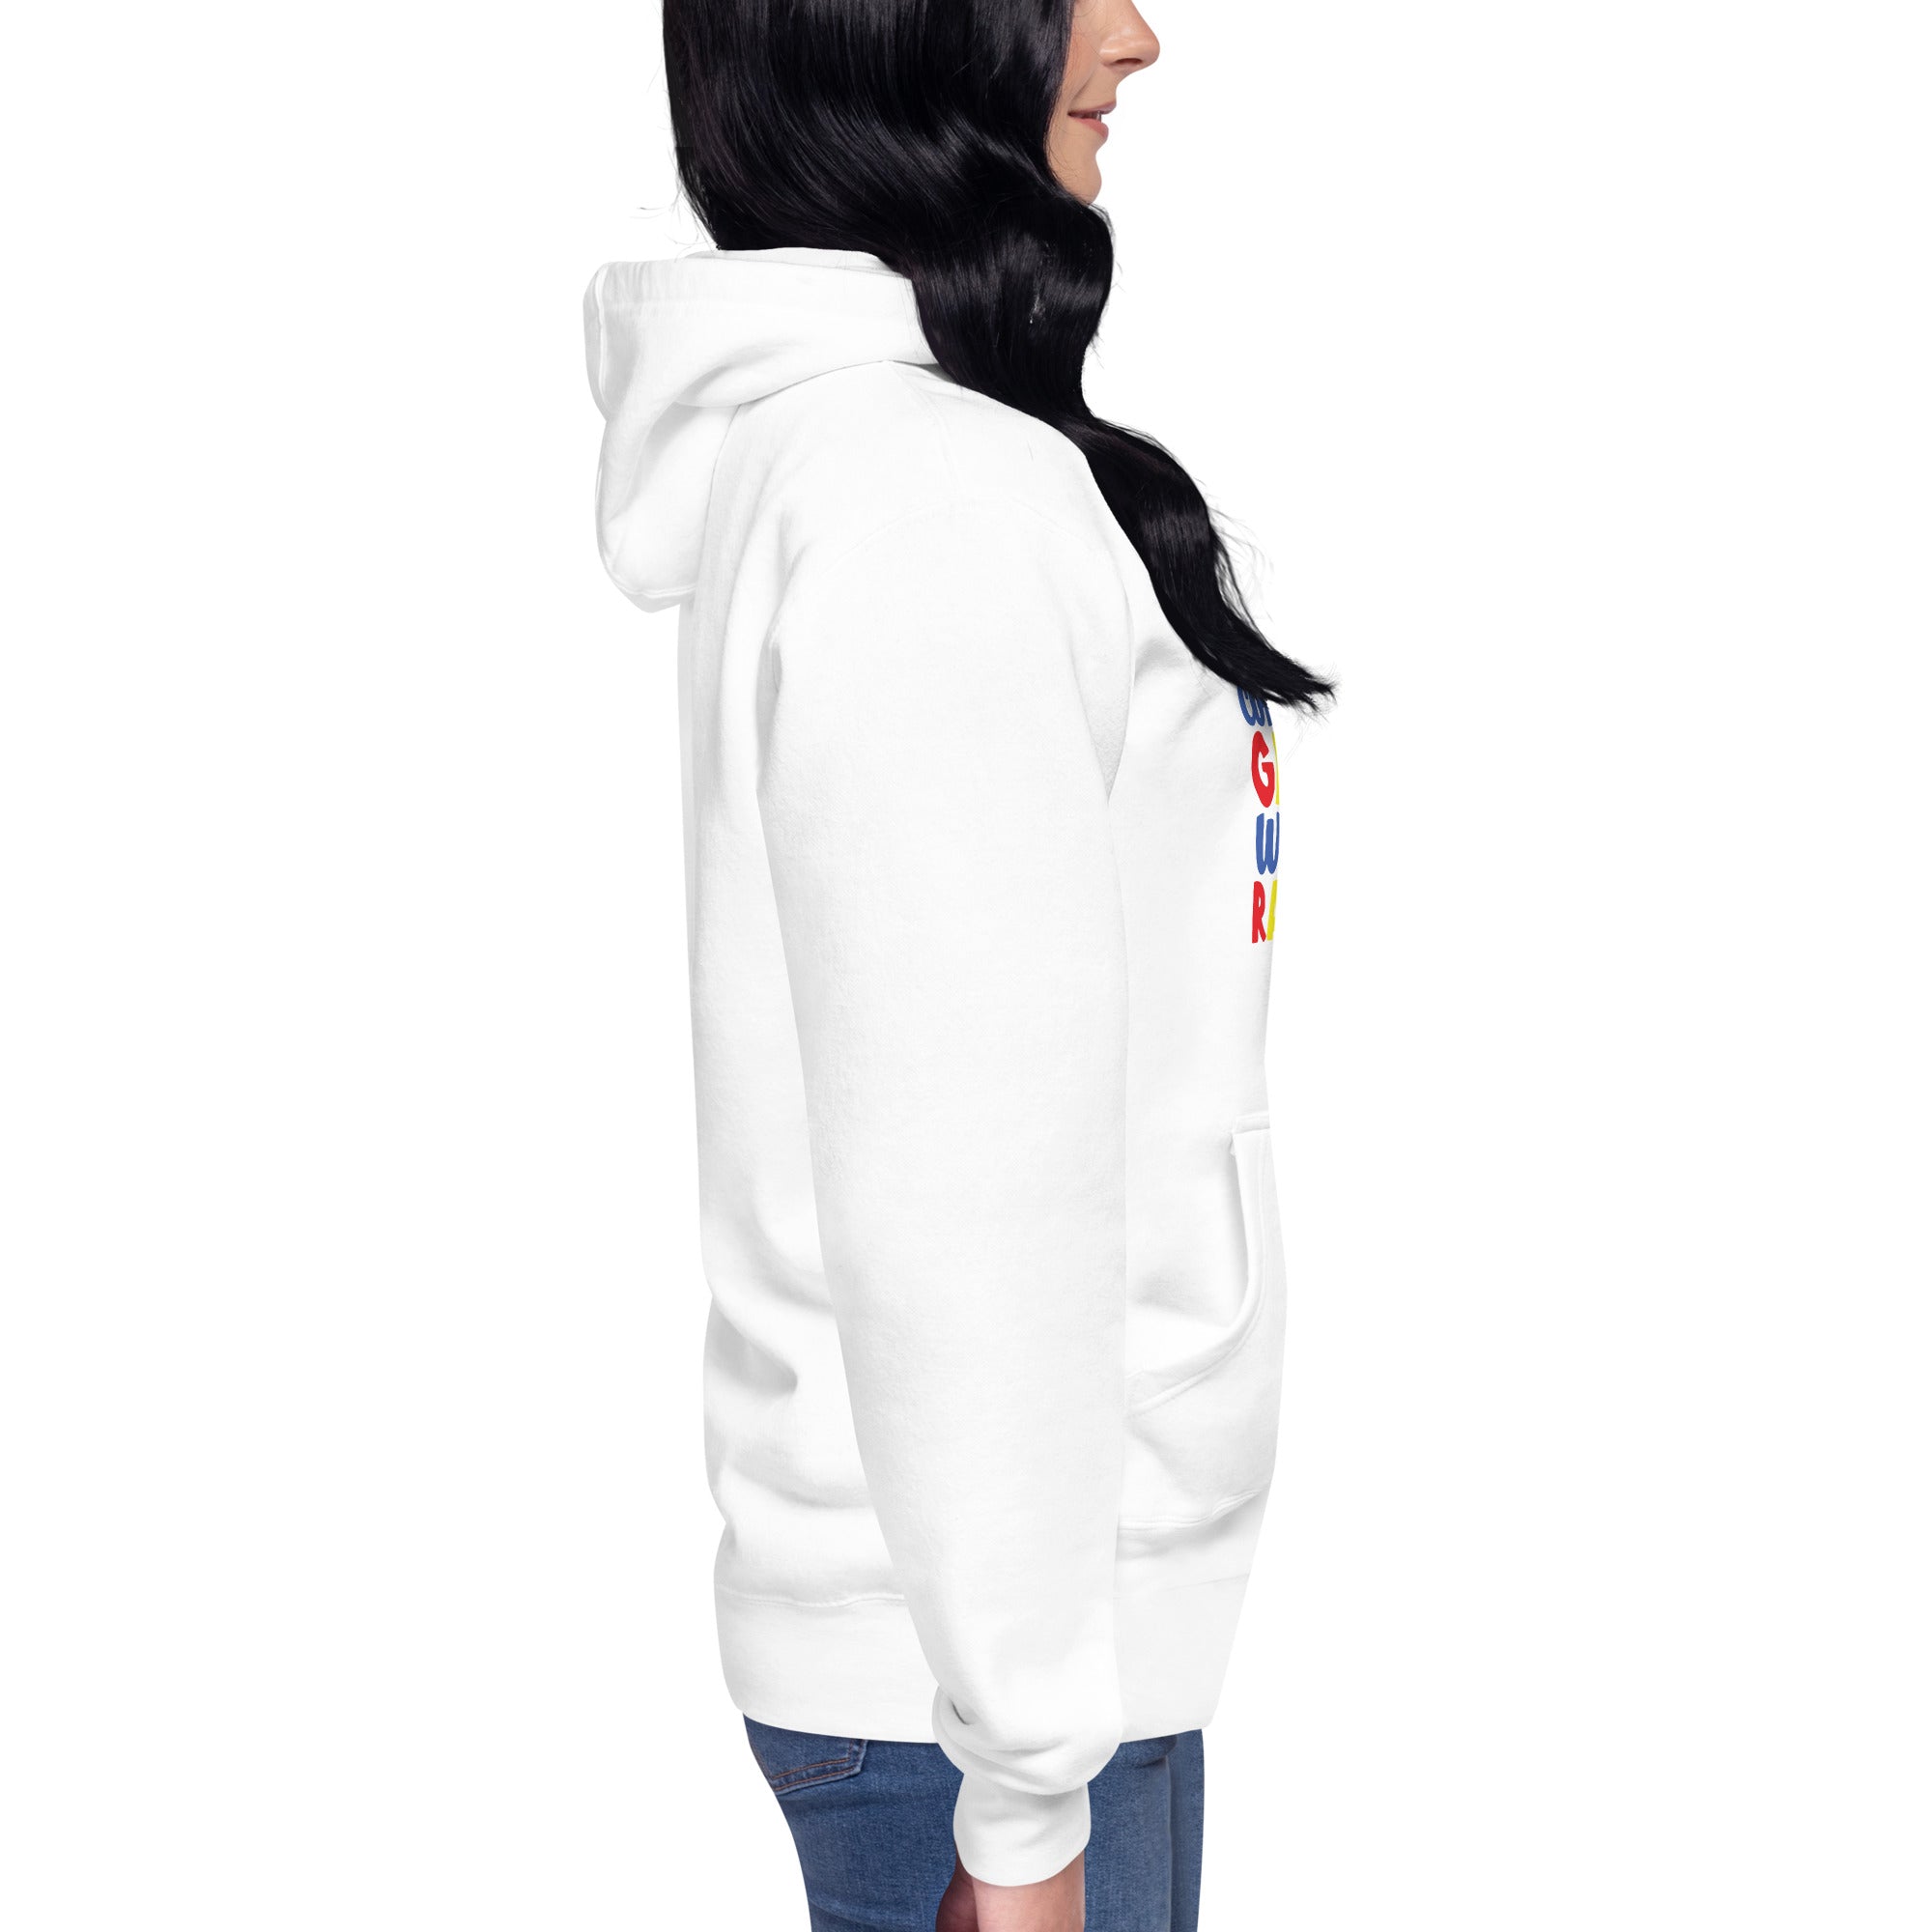 Unisex Hoodie- Come to the gay side we have rainbows